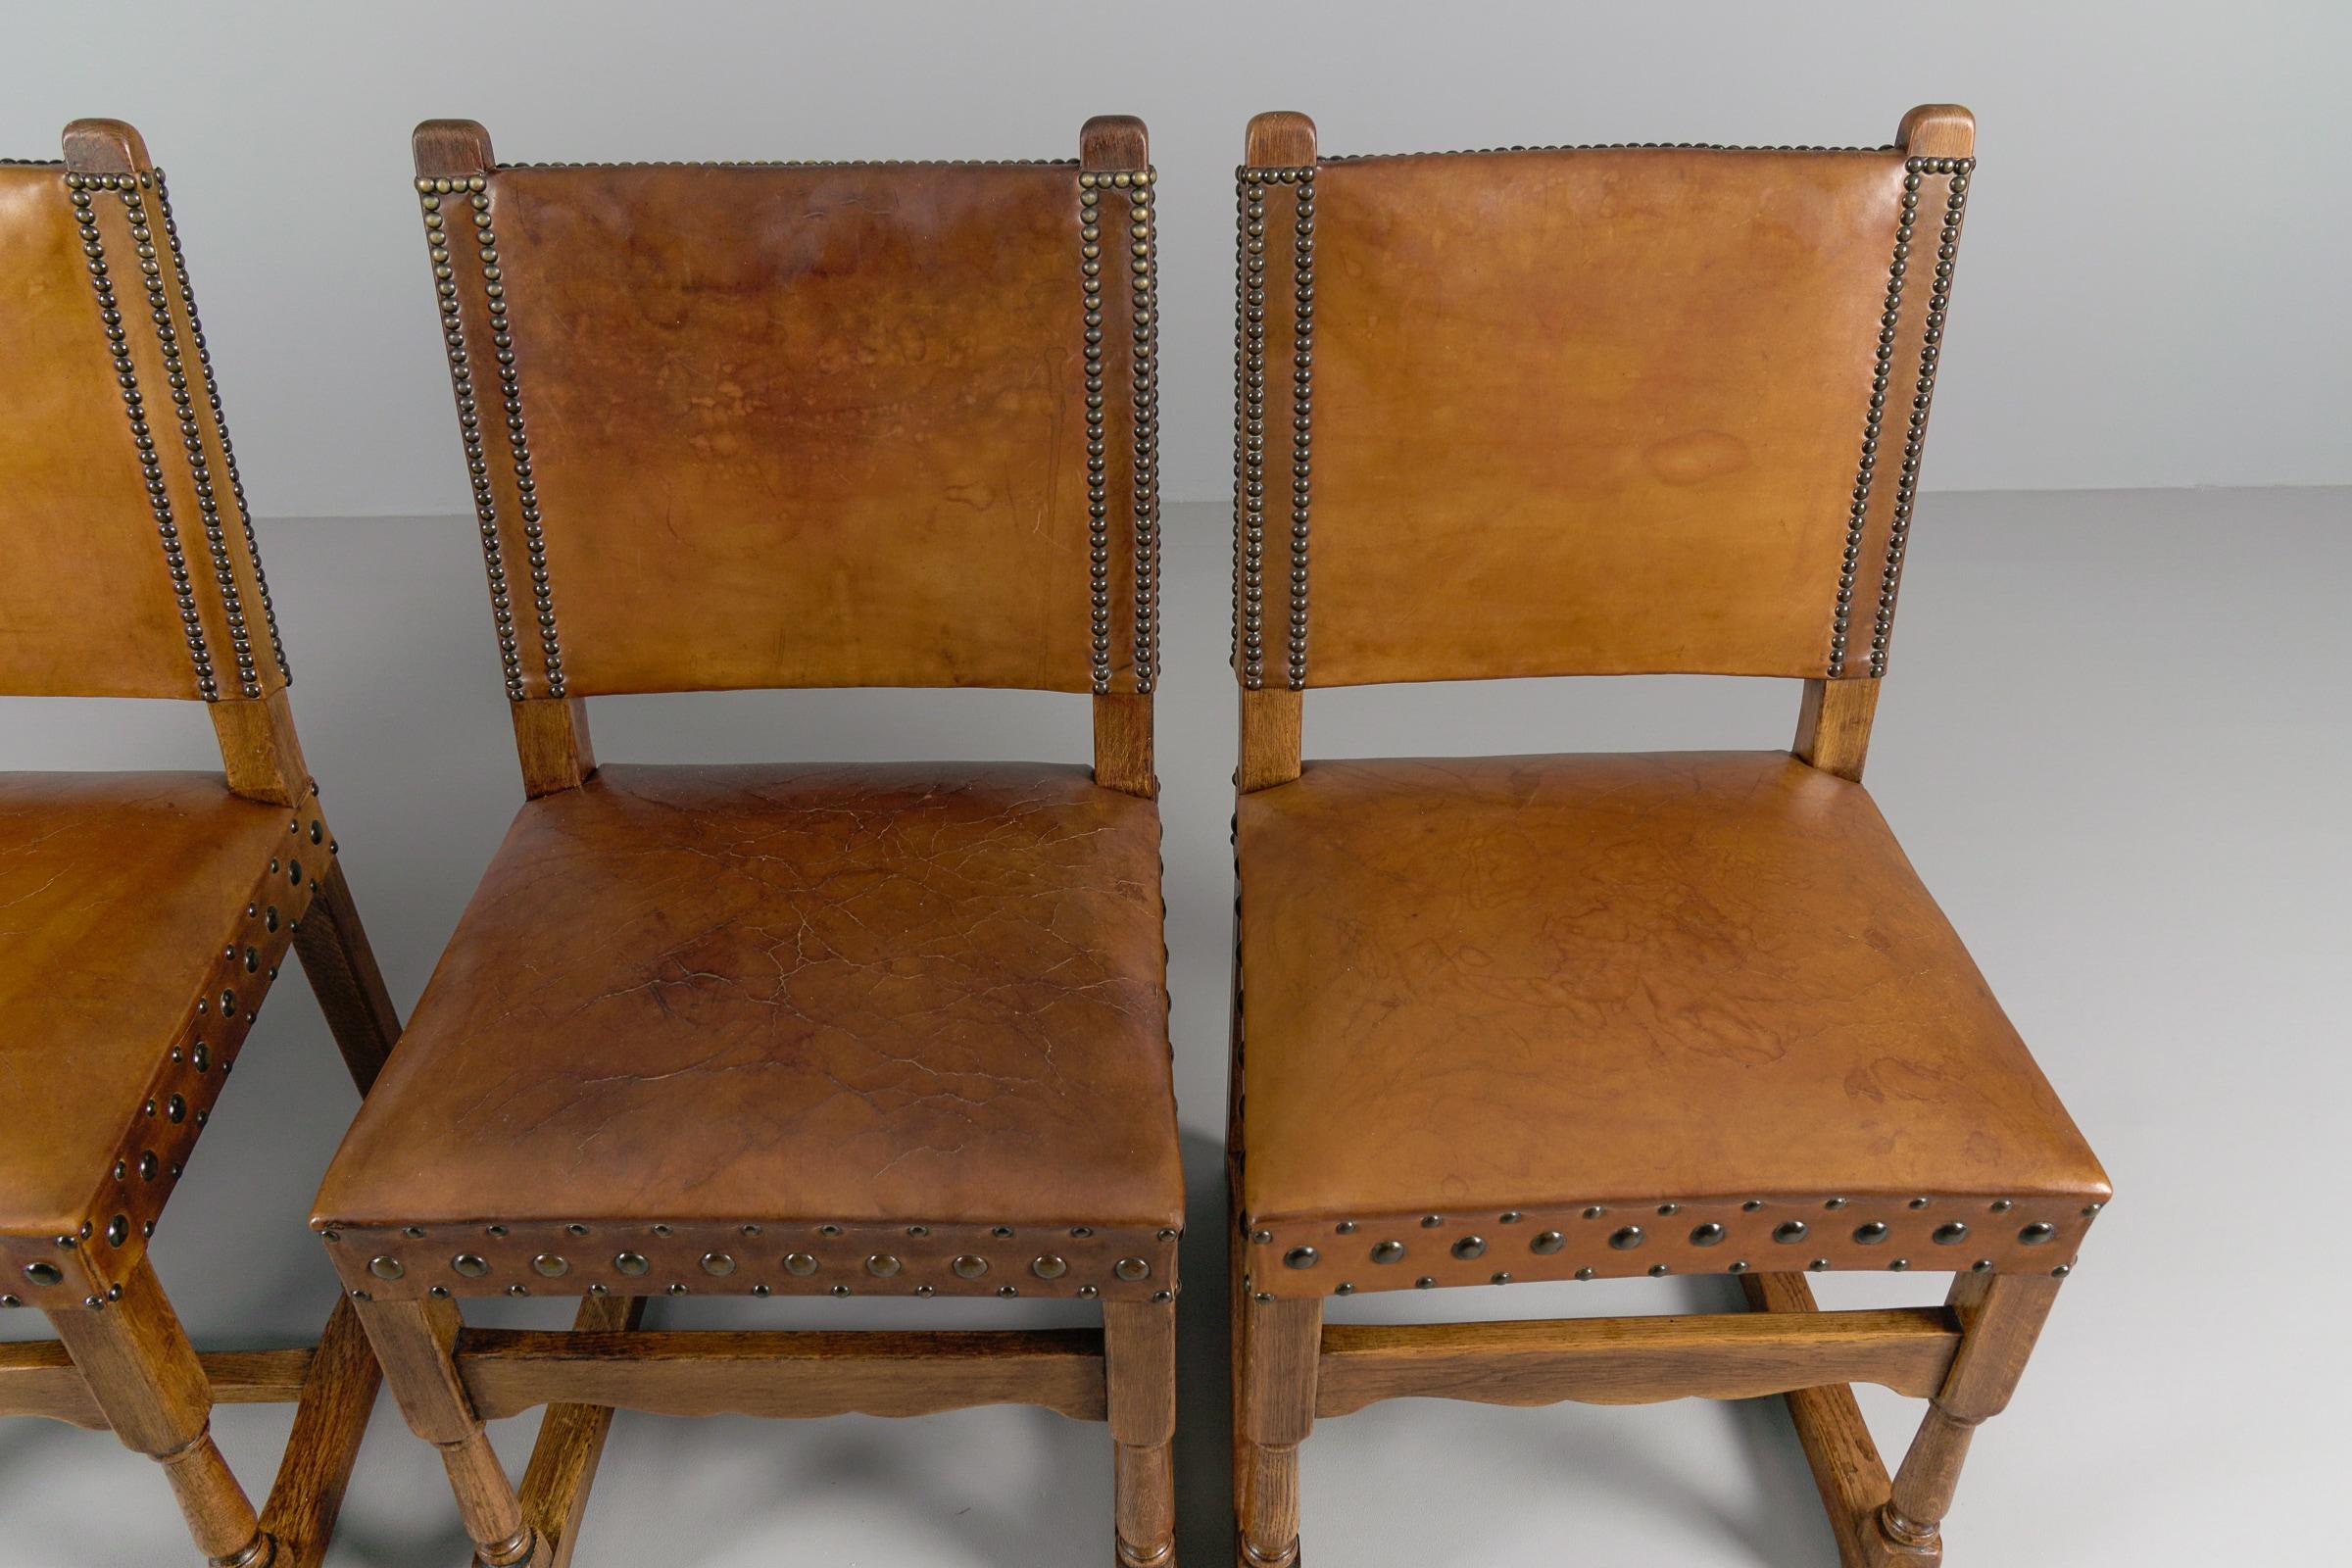  Spanish Leather and Wood Chairs, 1940s, Set of 4 For Sale 2